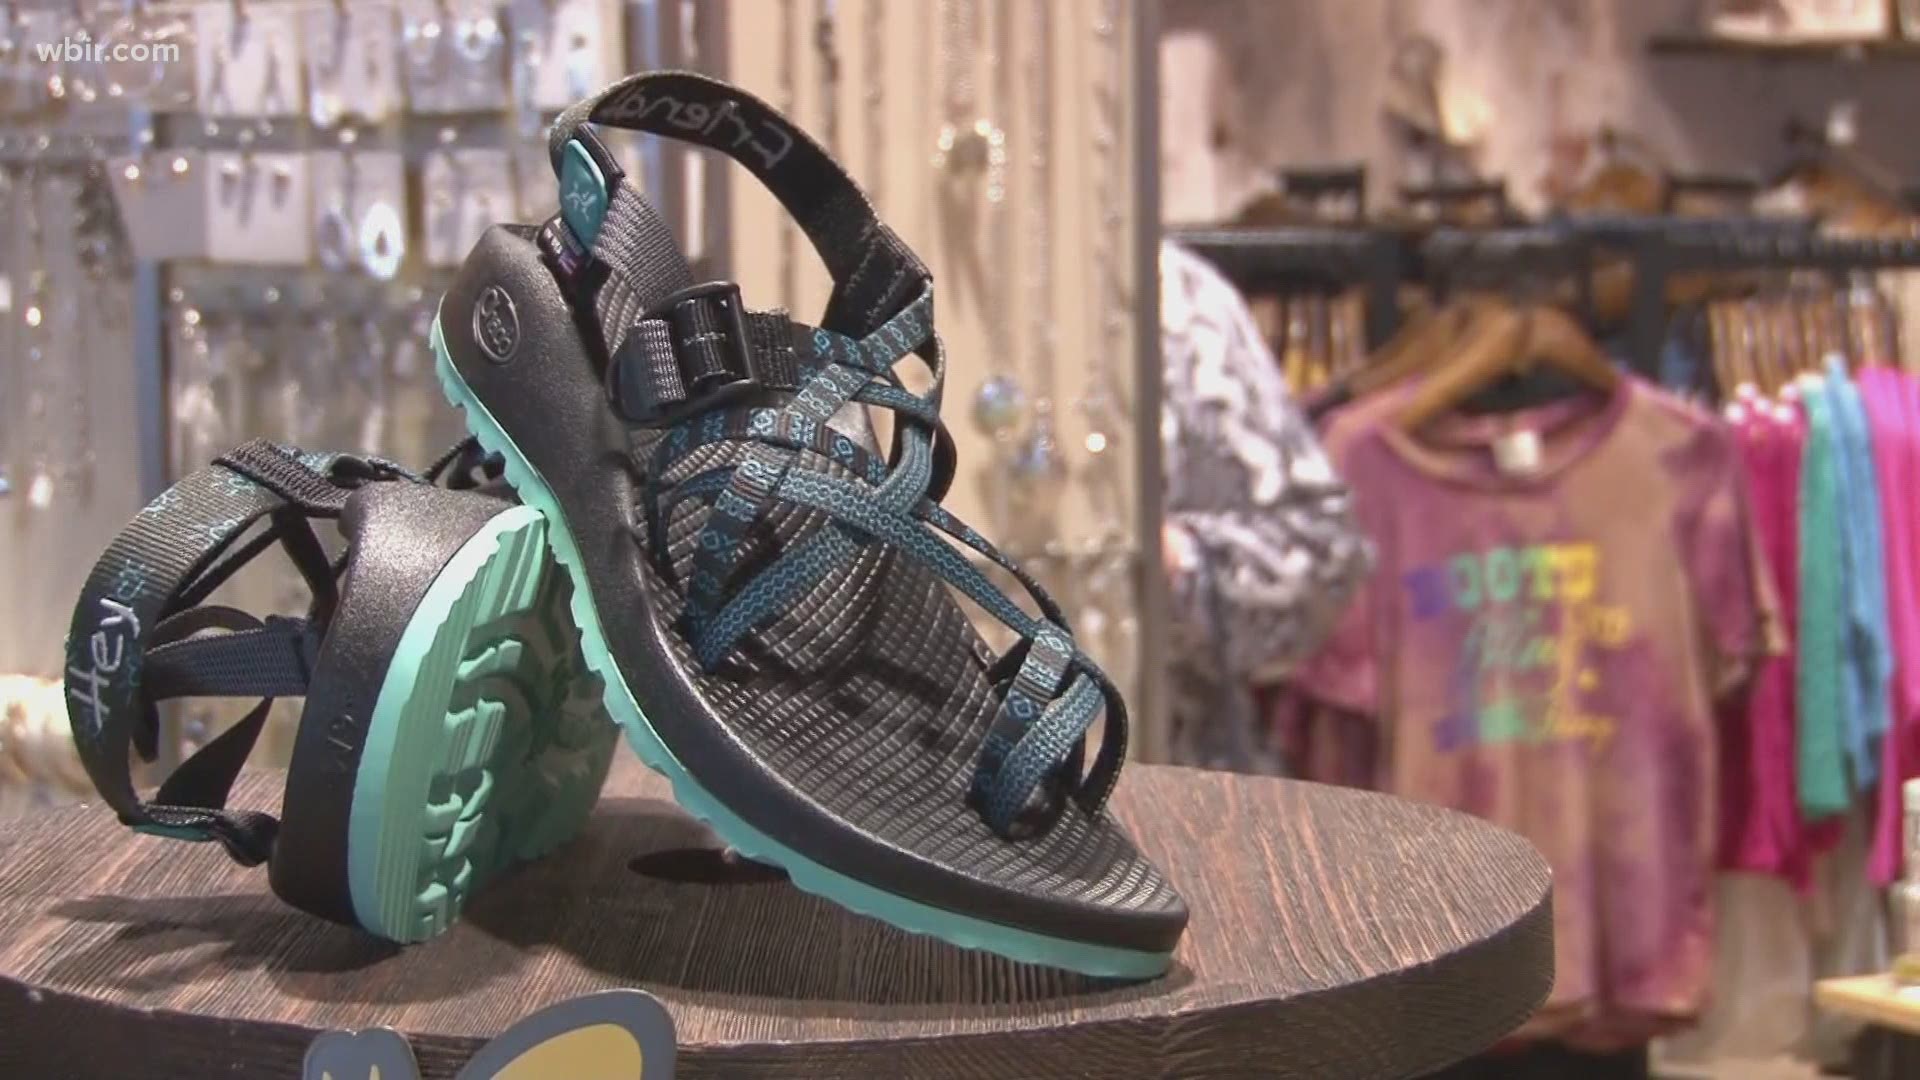 Custom Chacos on sale to honor Sevier 